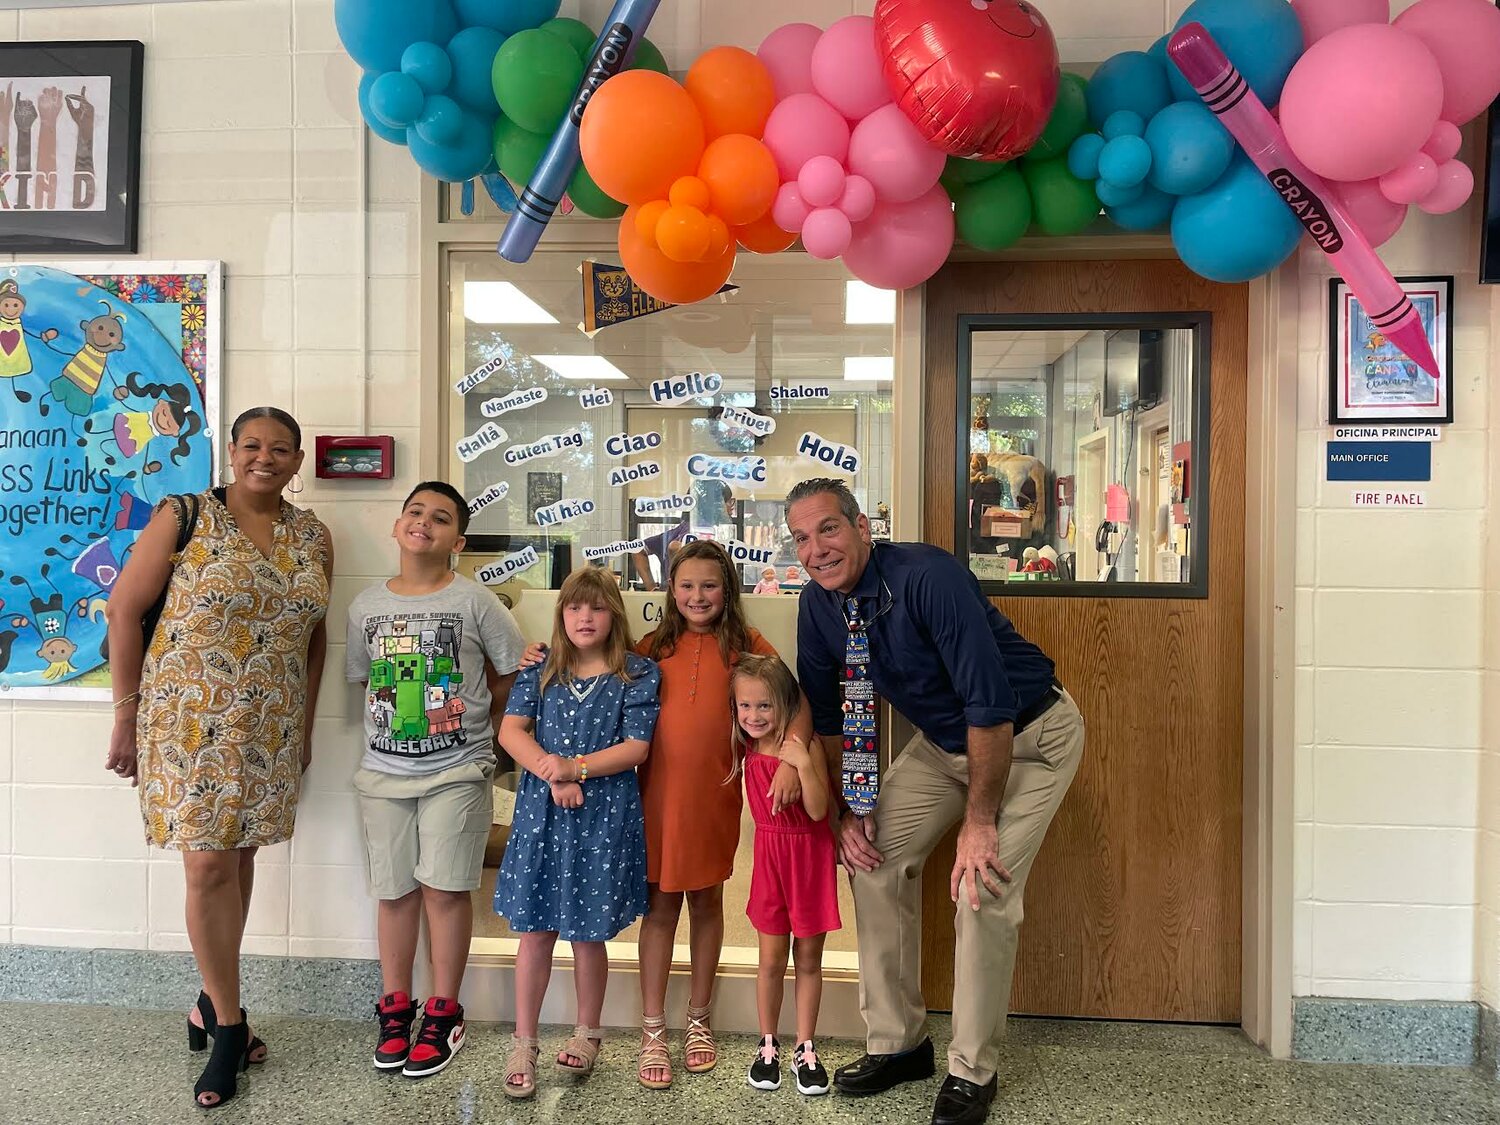 Superintendent of schools Dr. Donna Jones met with Canaan Elementary School principal Robert Epstein to welcome students back to school. Pictured with them from left to right: Giovanni Clark, third grade; Rebecca Zabinski, third grade; Lila Felice, third grade; and Luna Felice, kindergarten.